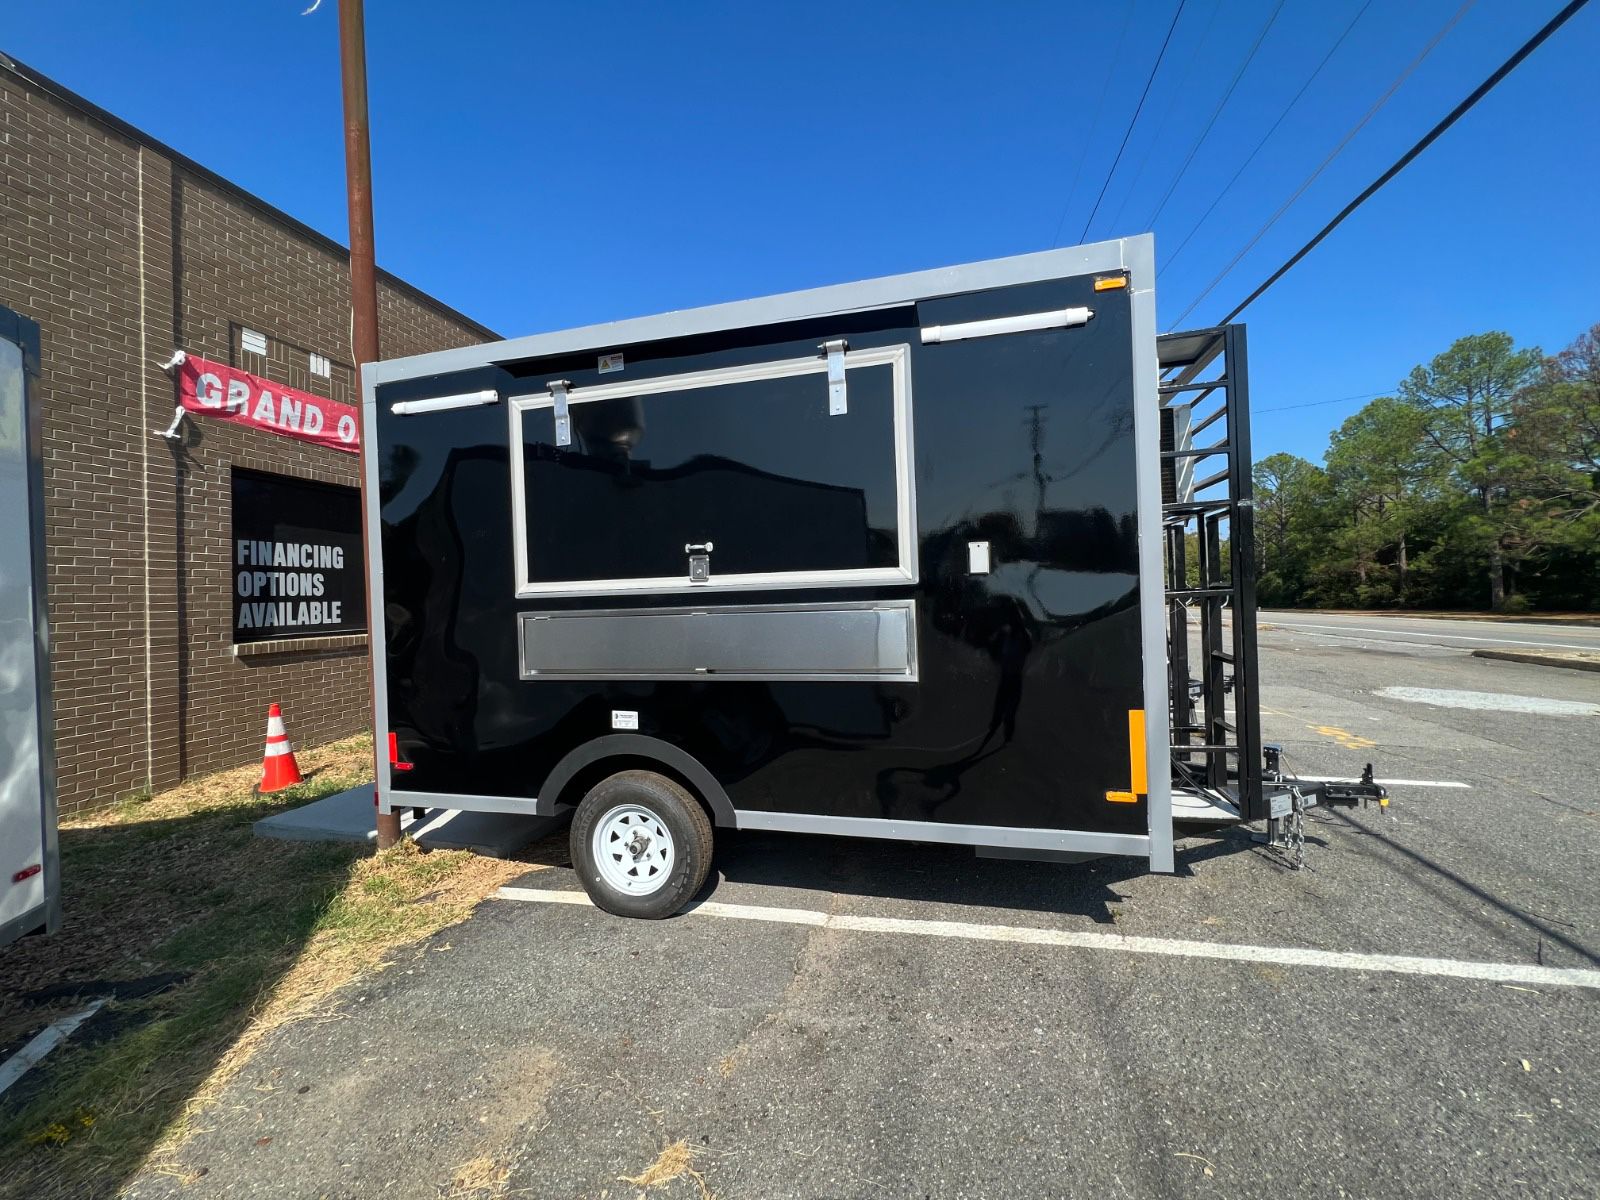 Food trailer for sale - concession trailer for sale - catering trailer for sale